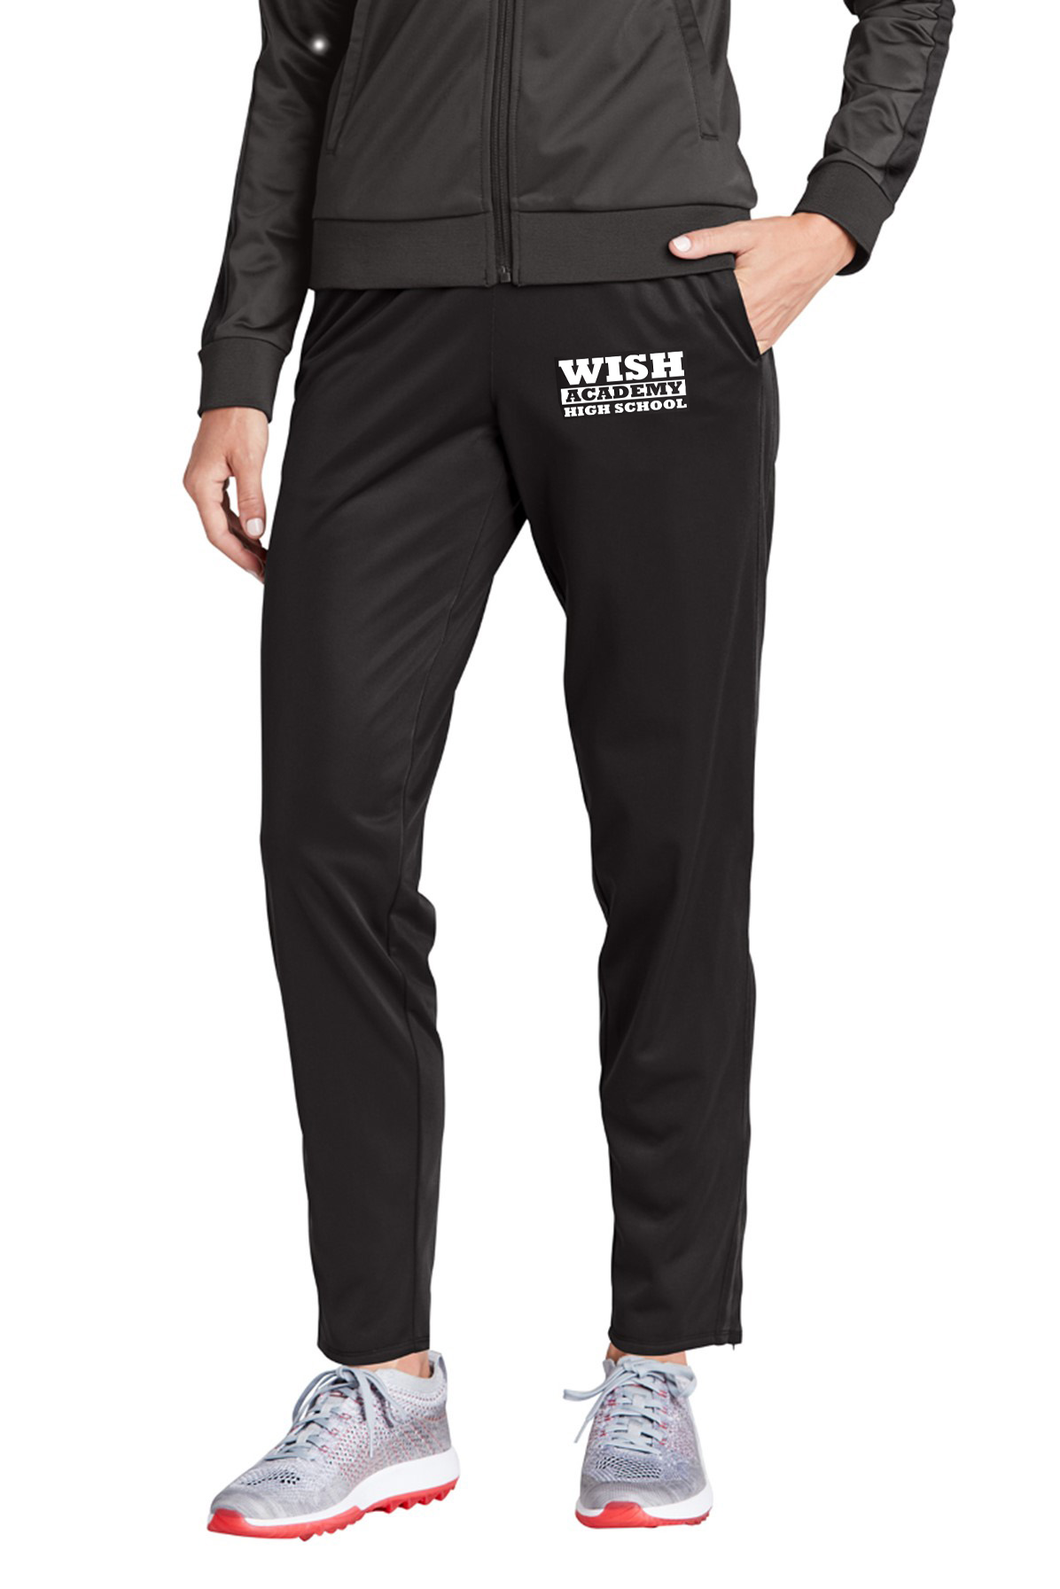 WISH Academy Women's Tapered Leg Athletic Active Pants